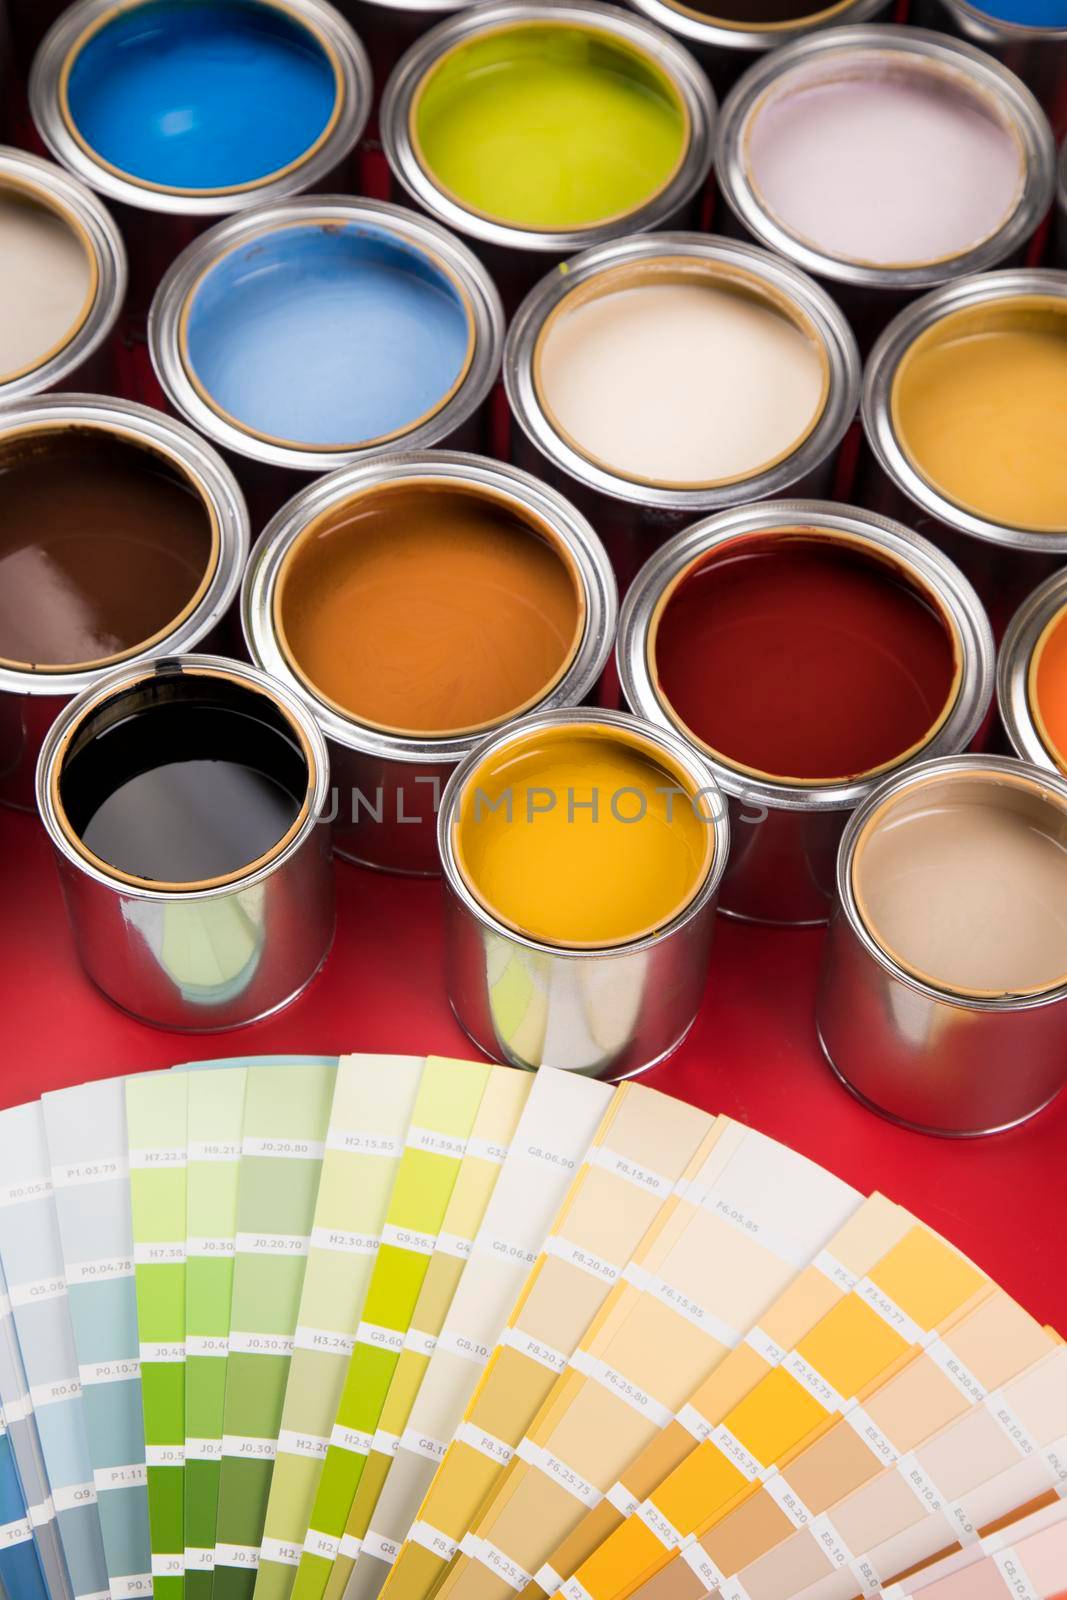 Tin cans with paint, brushes and bright palette of colors